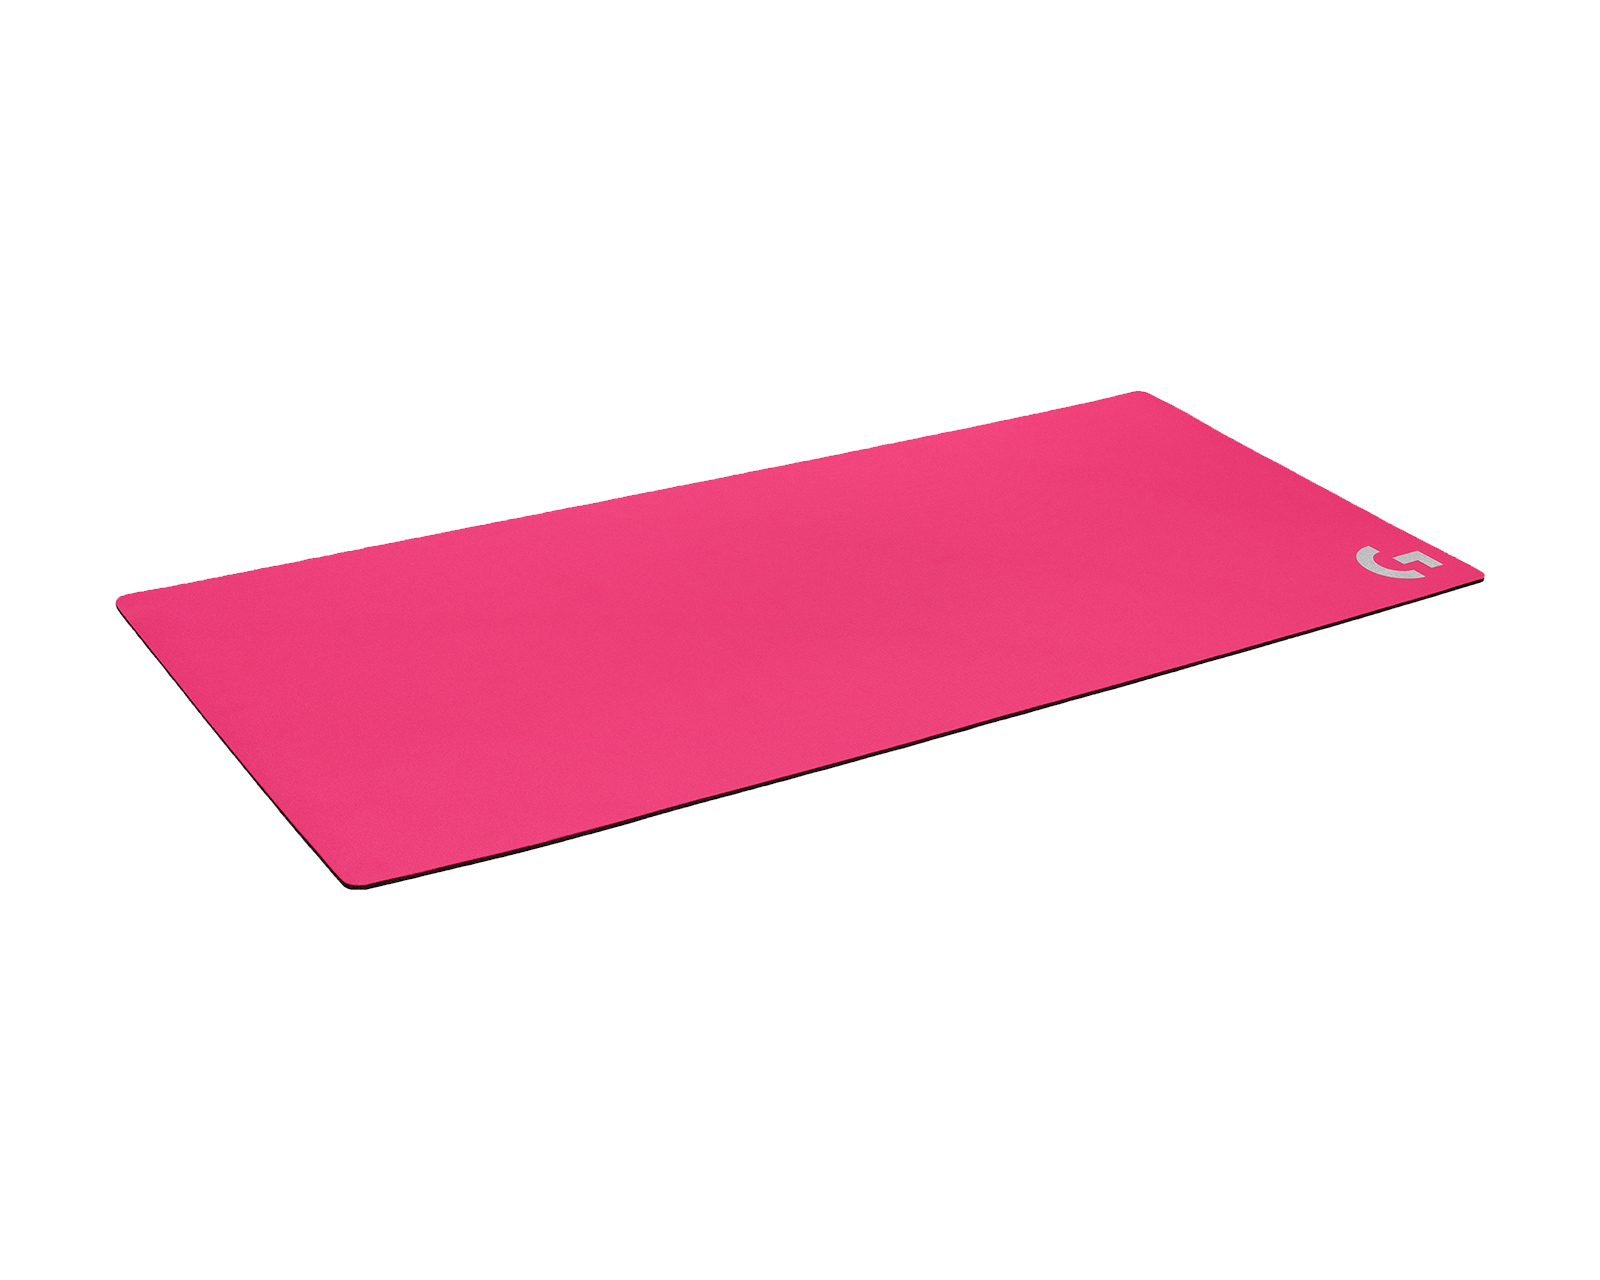 Logitech G840 XL Gaming Mouse Pad Pink Limited Edition